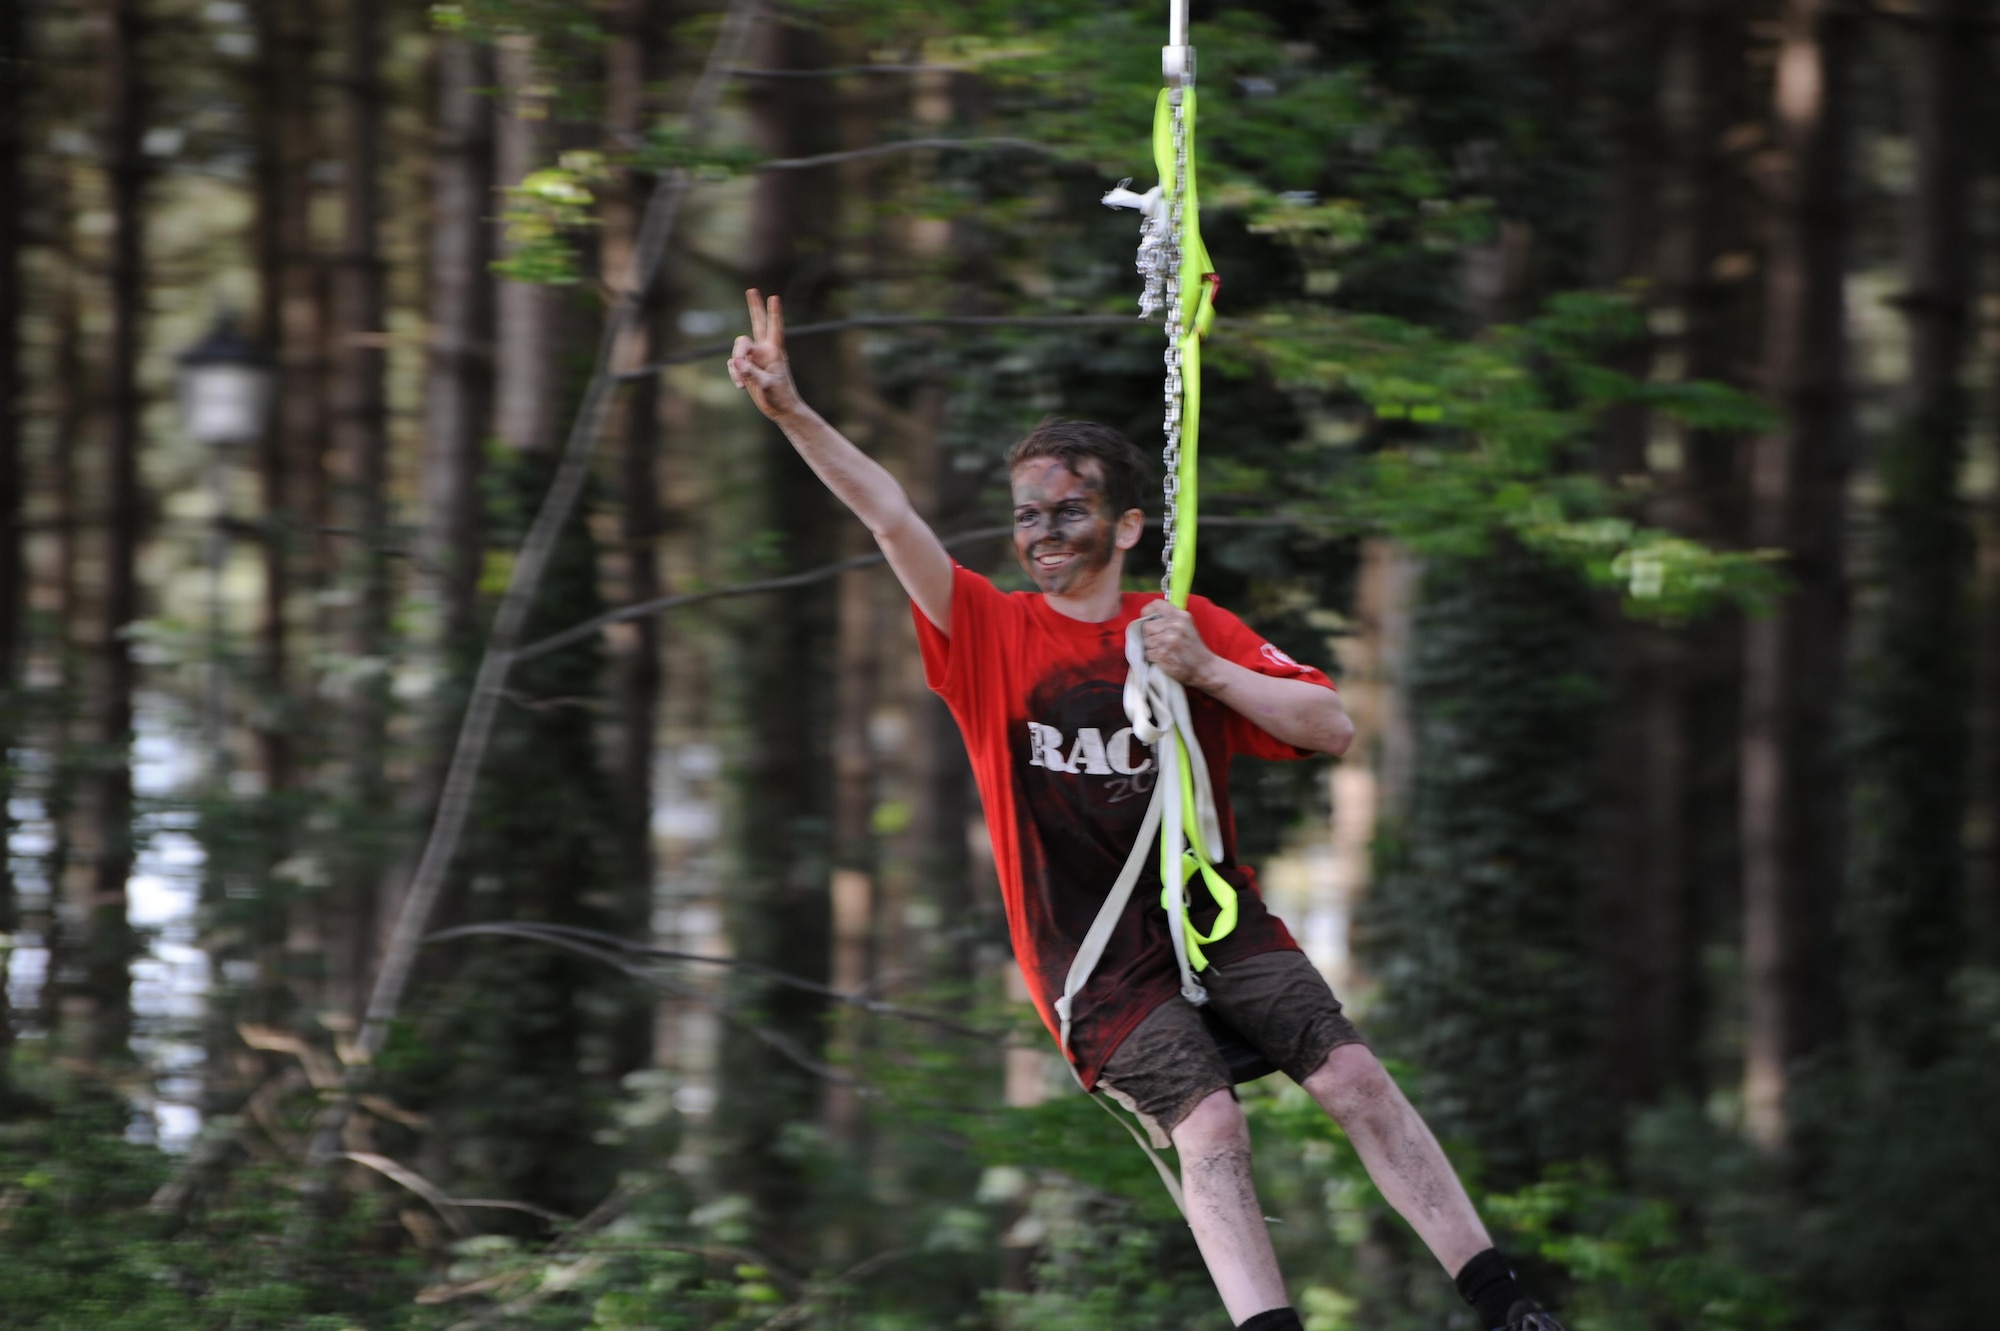 A son zip lines through the wooded area during the “Momster Mash” May 16, 2015, at the Heritage Park sports fields on RAF Mildenhall, England. The event was hosted by the 352nd Special Operations Wing Preservation of Force and Families team and was aimed at providing an opportunity for mothers and their sons – traditionally a relationship with difficulties -- to bond. (U.S. Air Force photo by Tech. Sgt. Stacia Zachary)